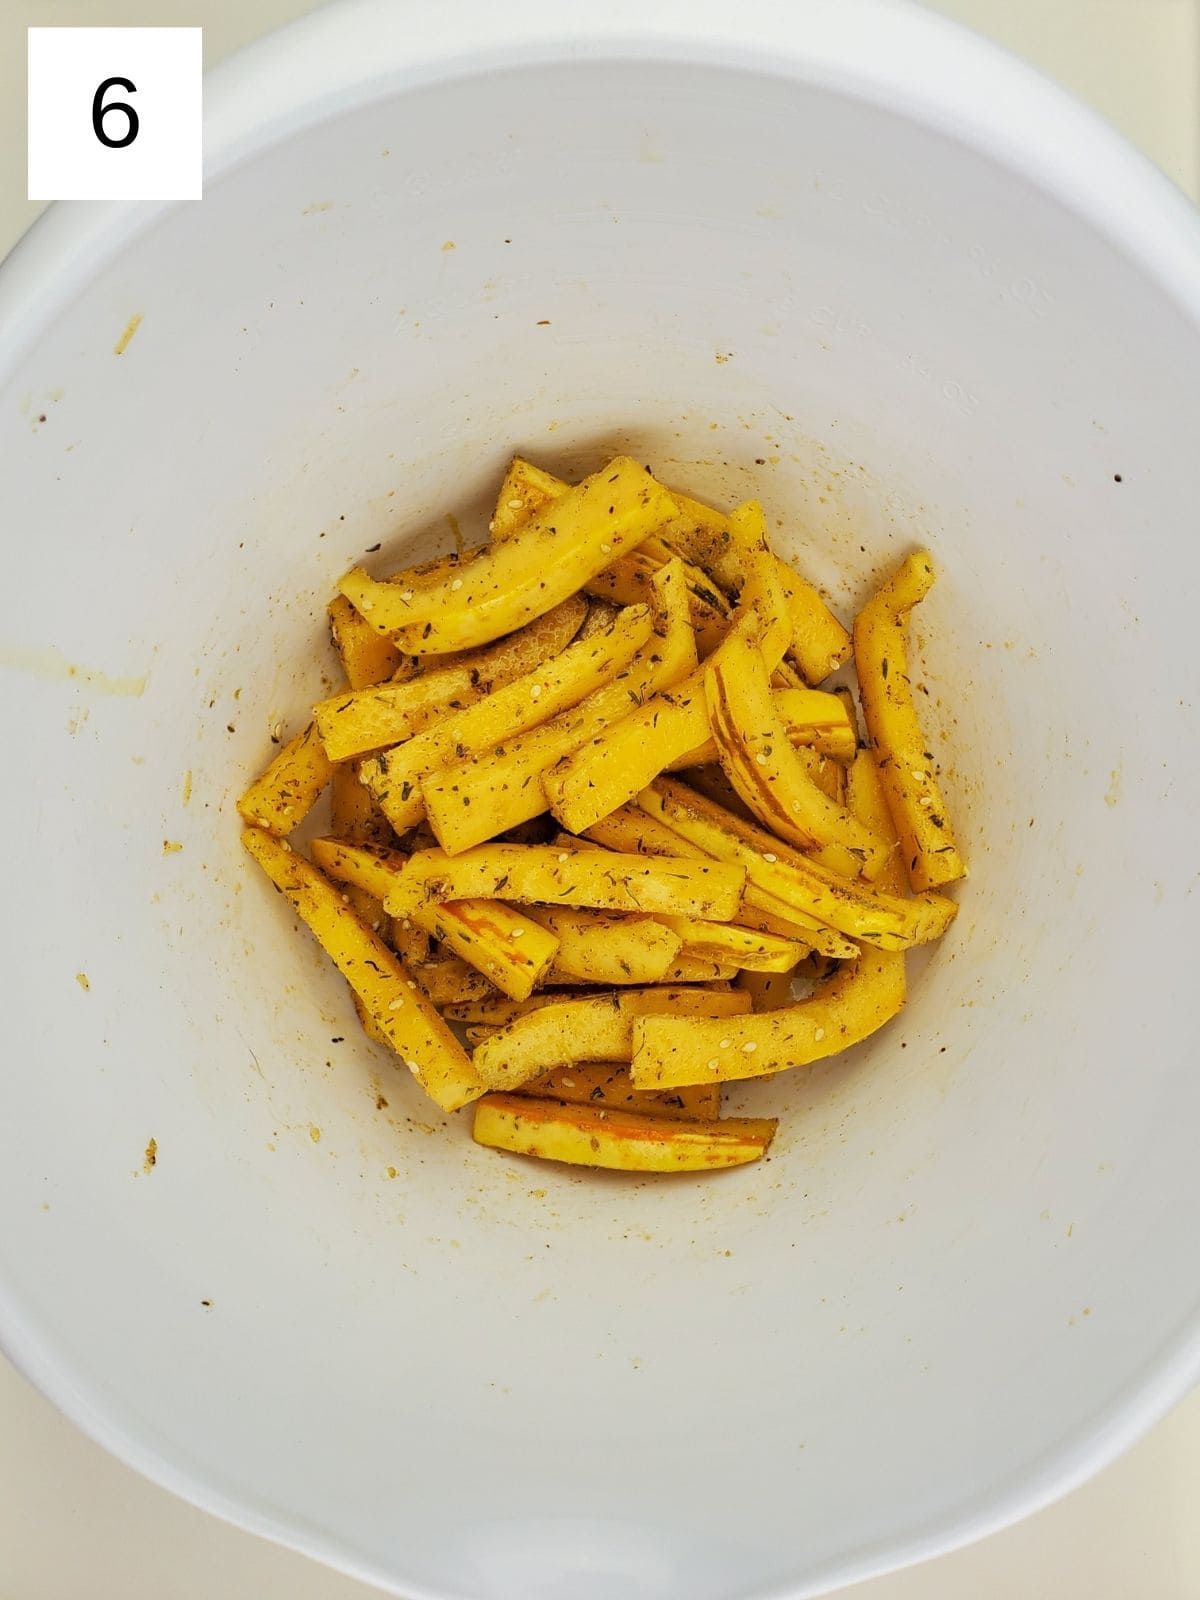 pieces of delicata squash fries tossed in oil & seasonings in a bowl.